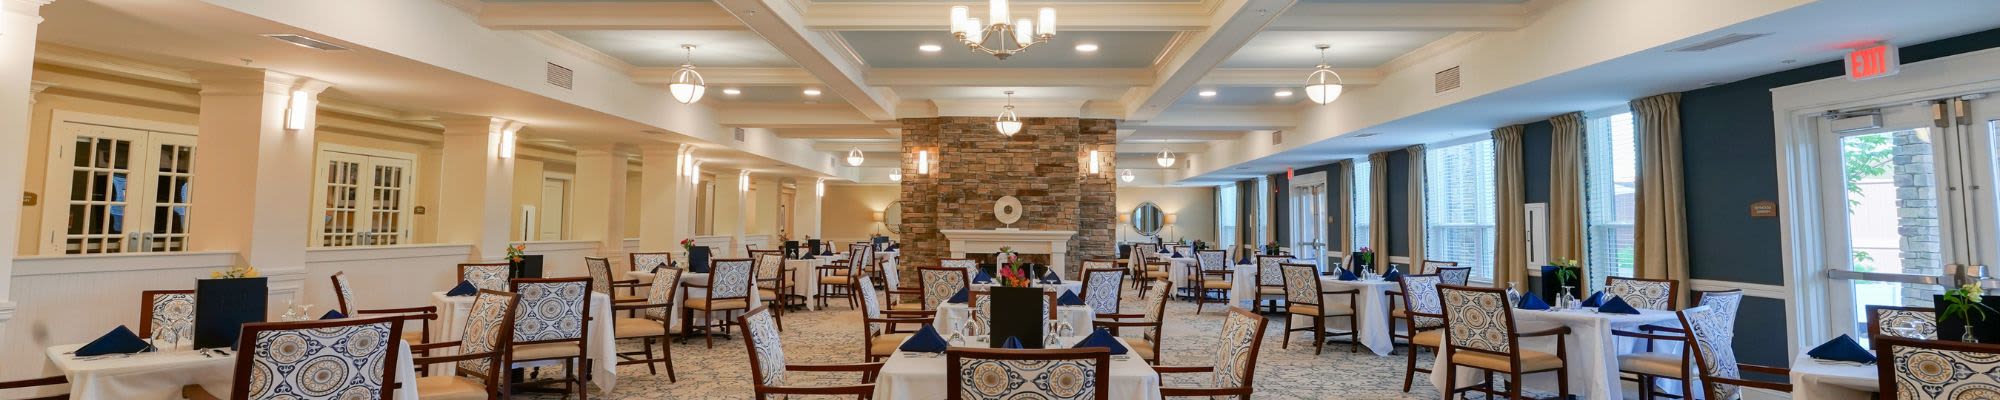 Dining at Harmony at West Shore in Mechanicsburg, Pennsylvania